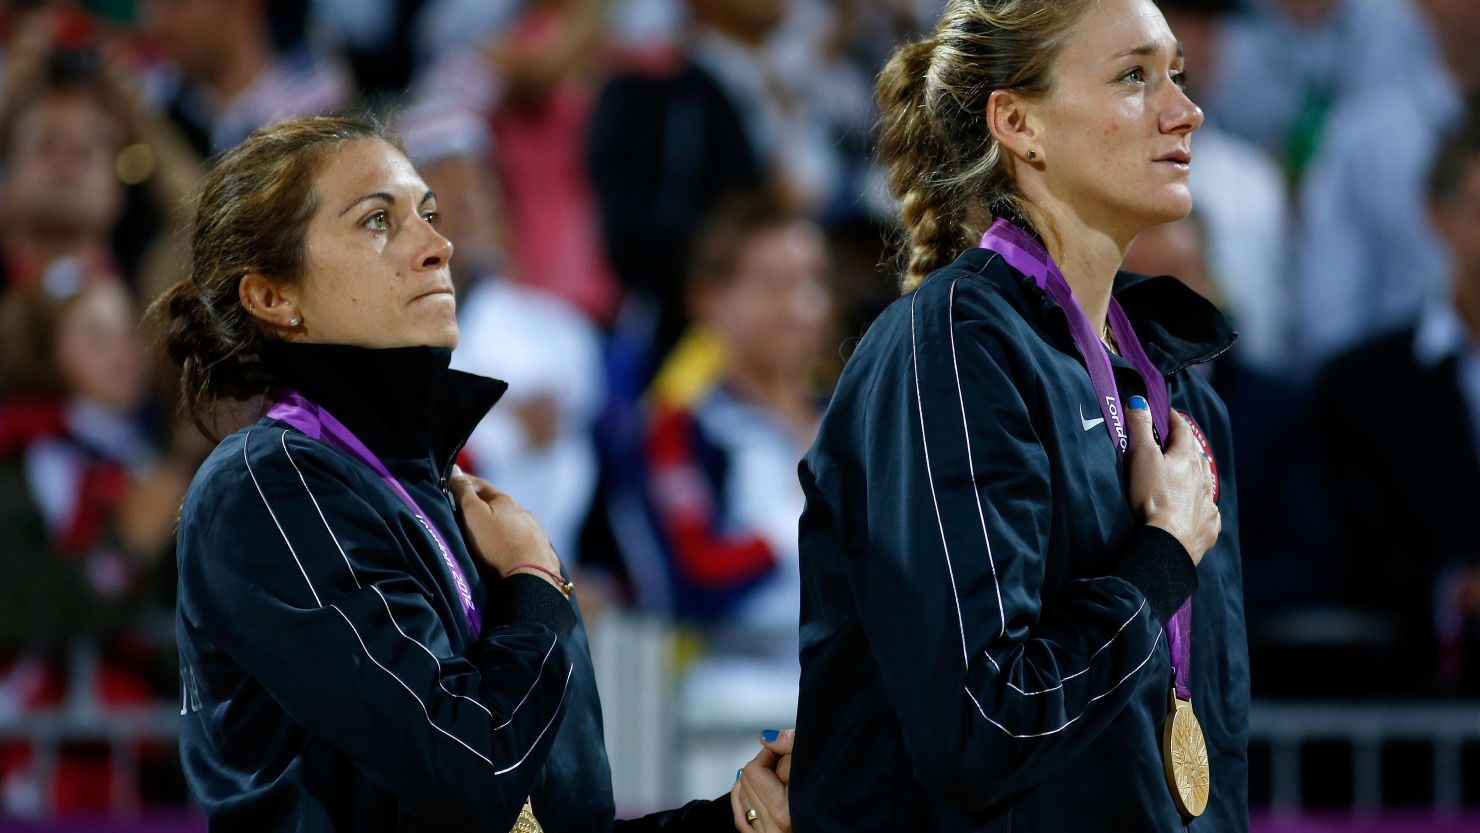 Gold medallists Misty May-Treanor, left, and Kerri Walsh Jennings celebrate winning the Gold medal at the London 2012 Olympic Games on August 8, 2012. 